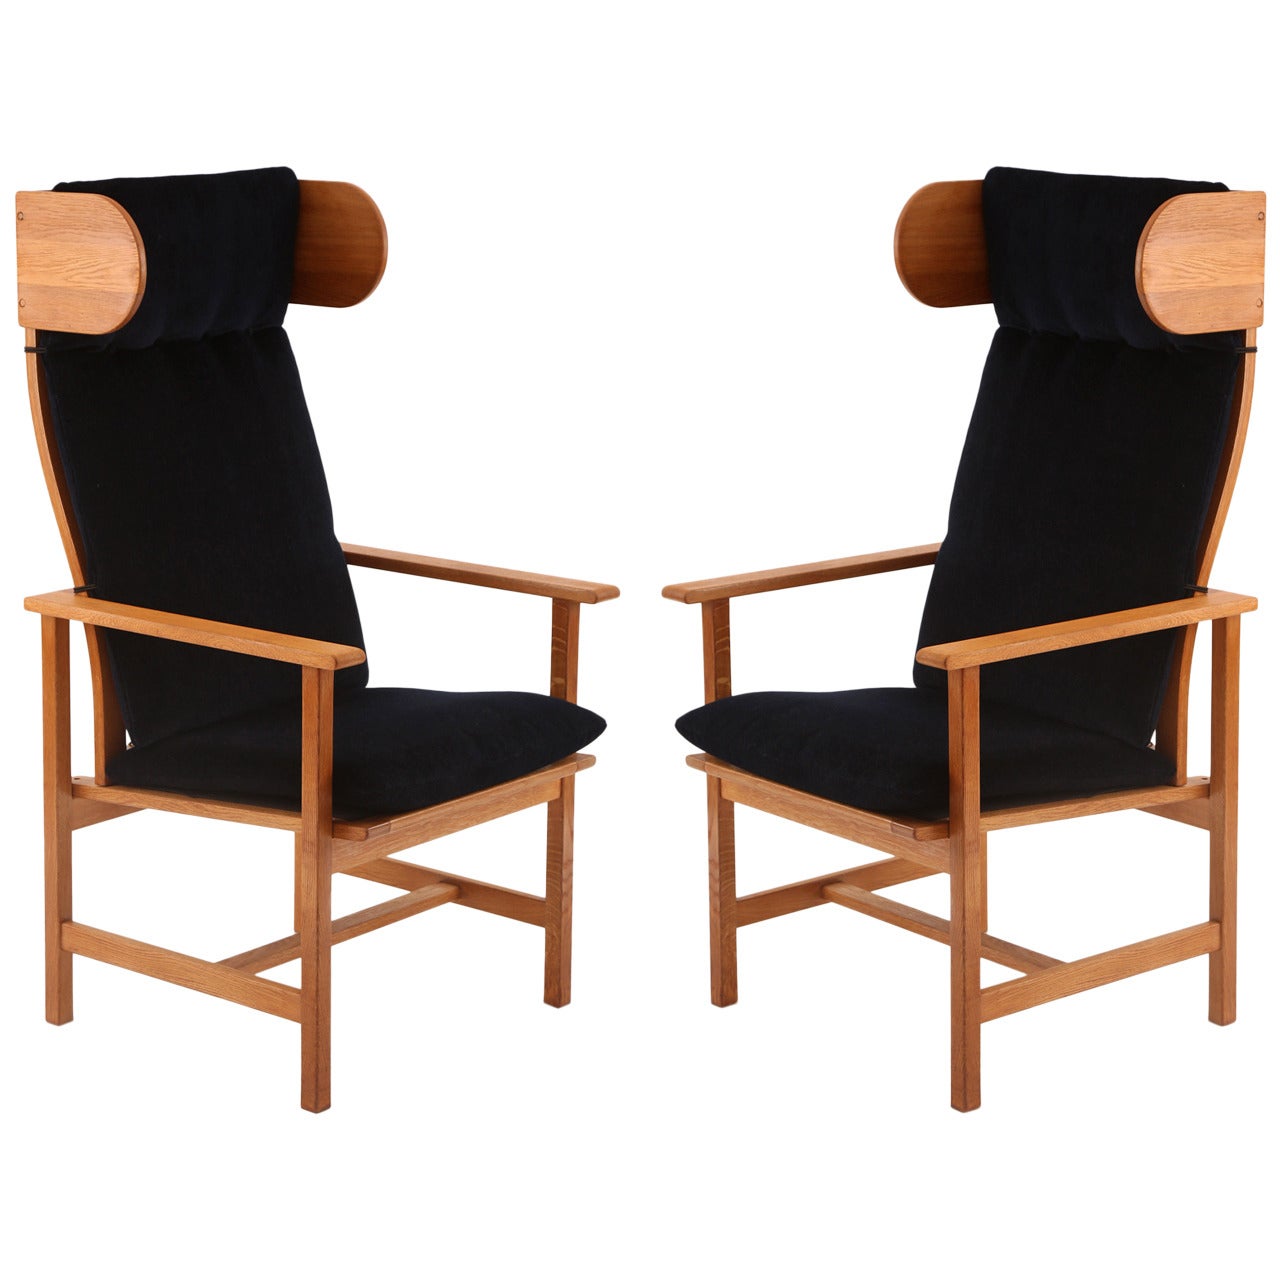 Pair of Sculptural Oak and Mohair Armchairs by Børge Mogensen